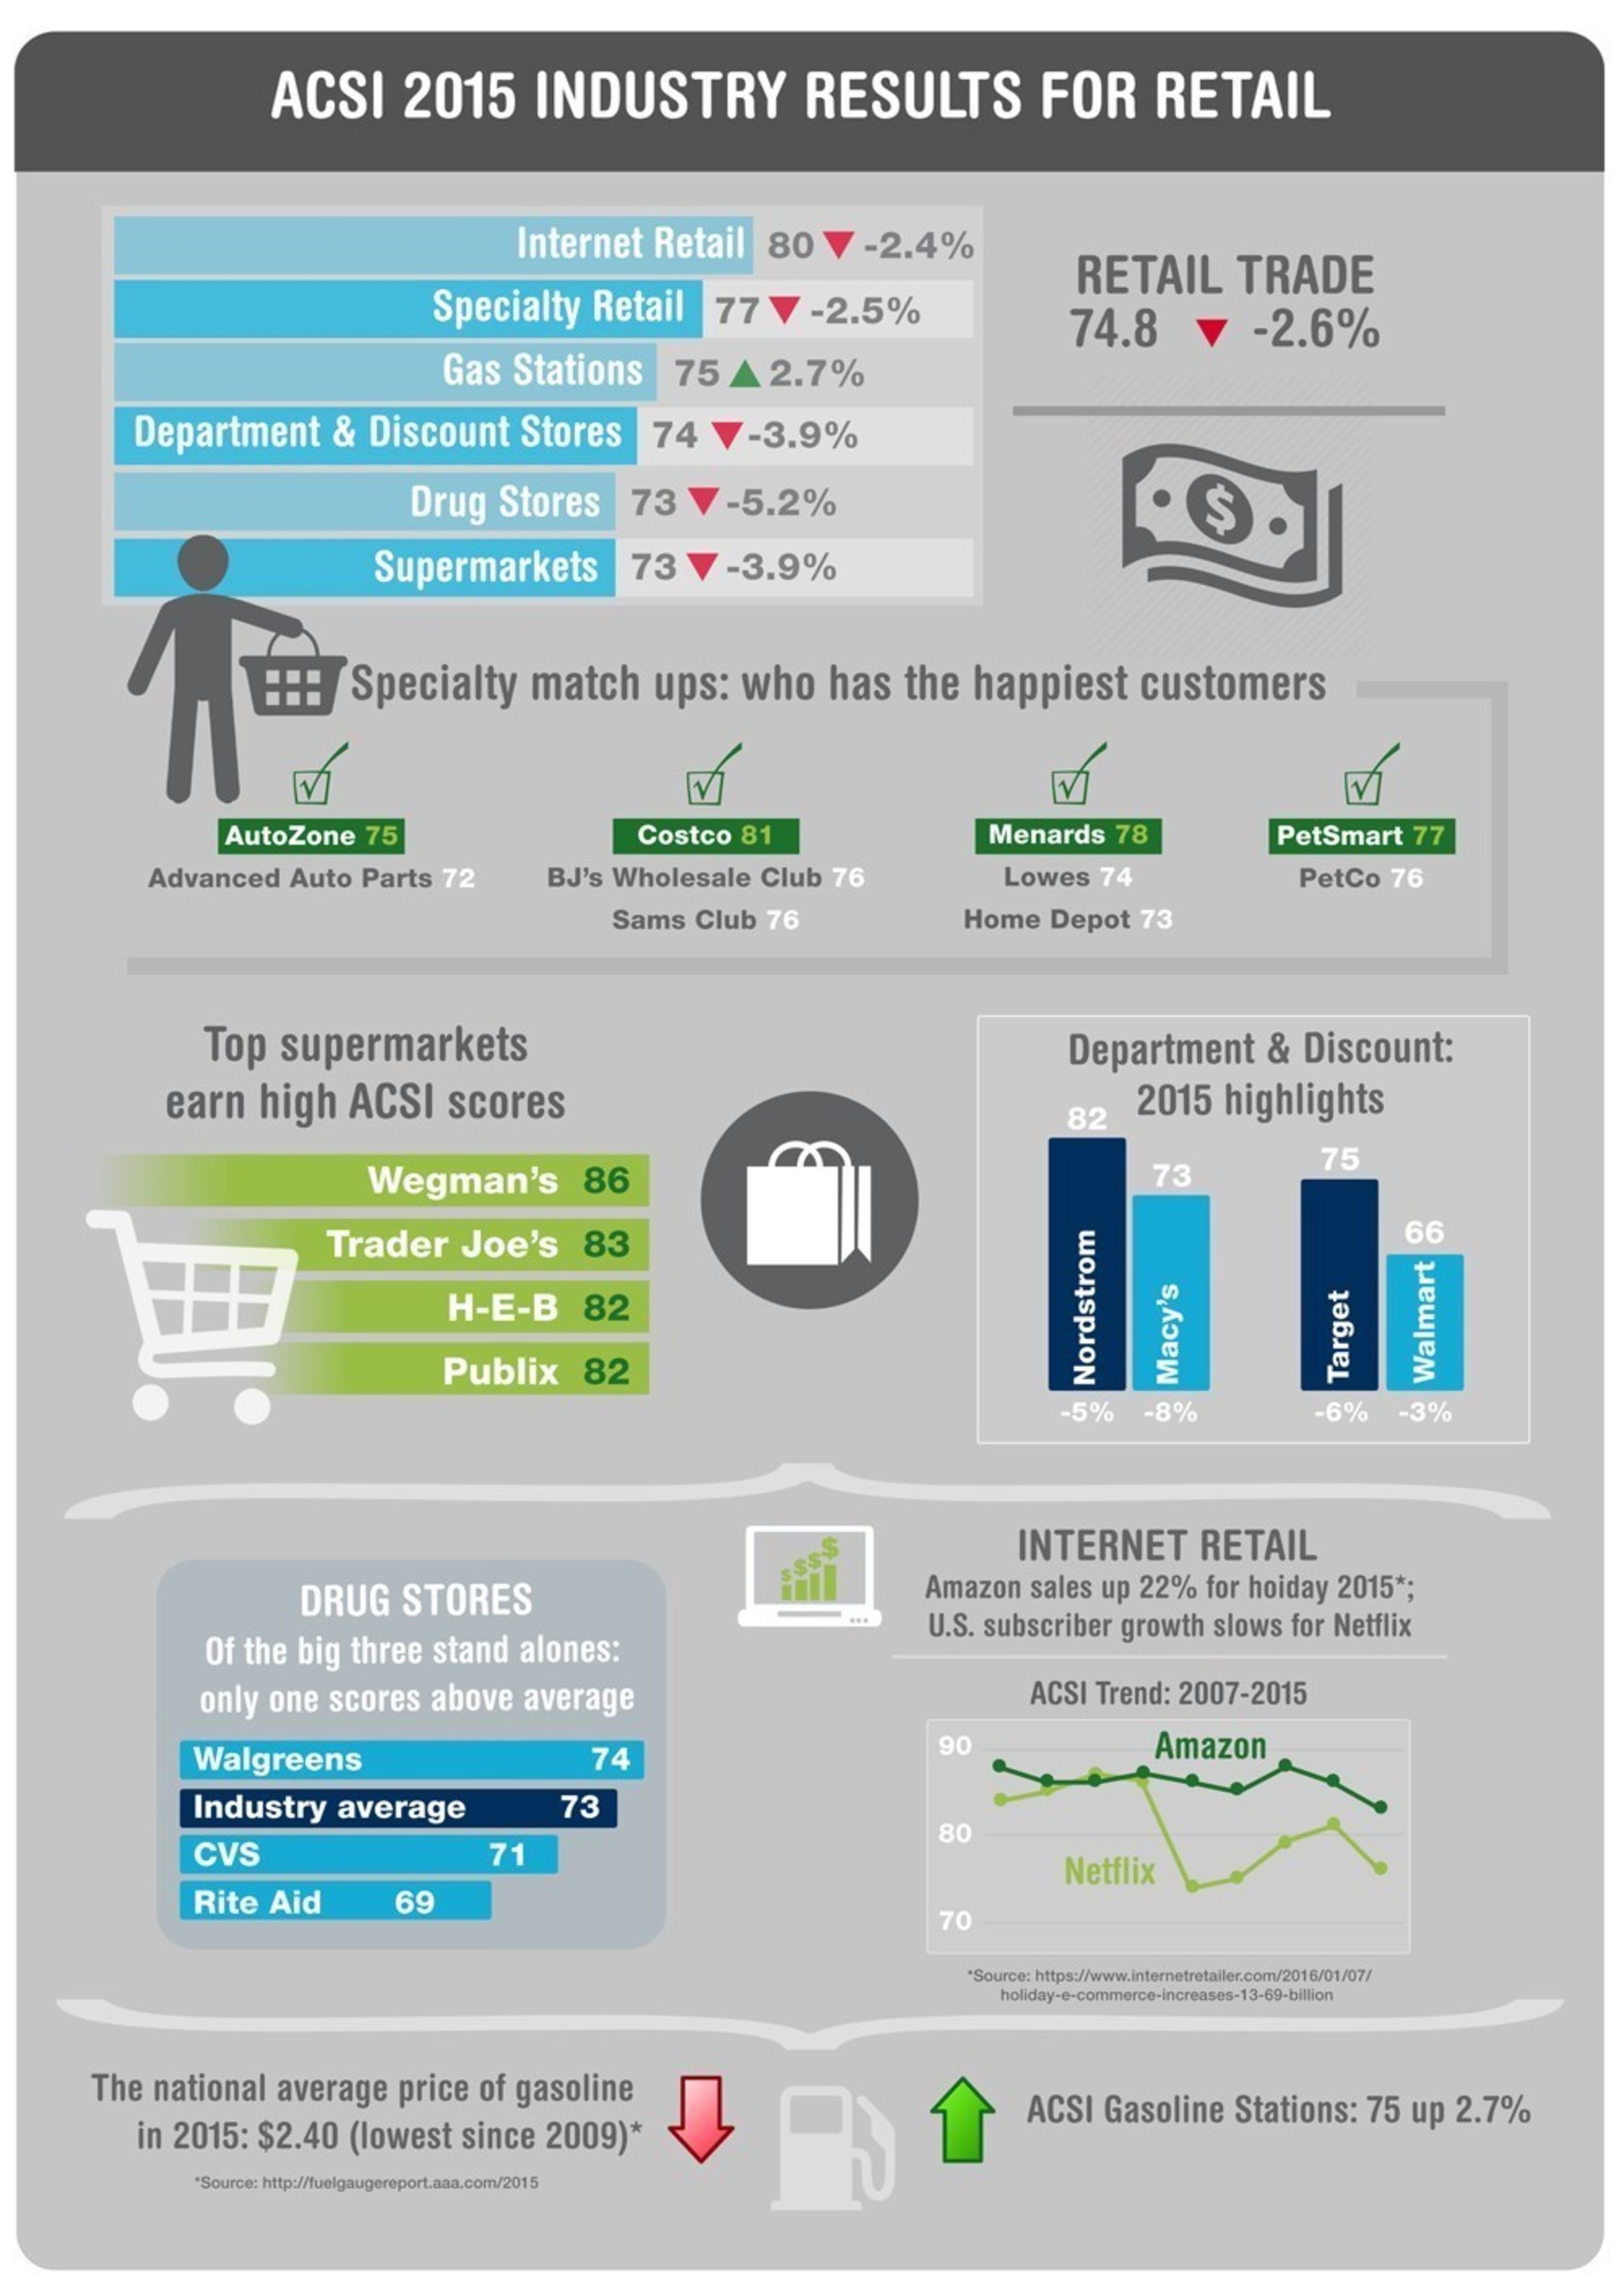 ACSI 2015 Industry Results for Retail